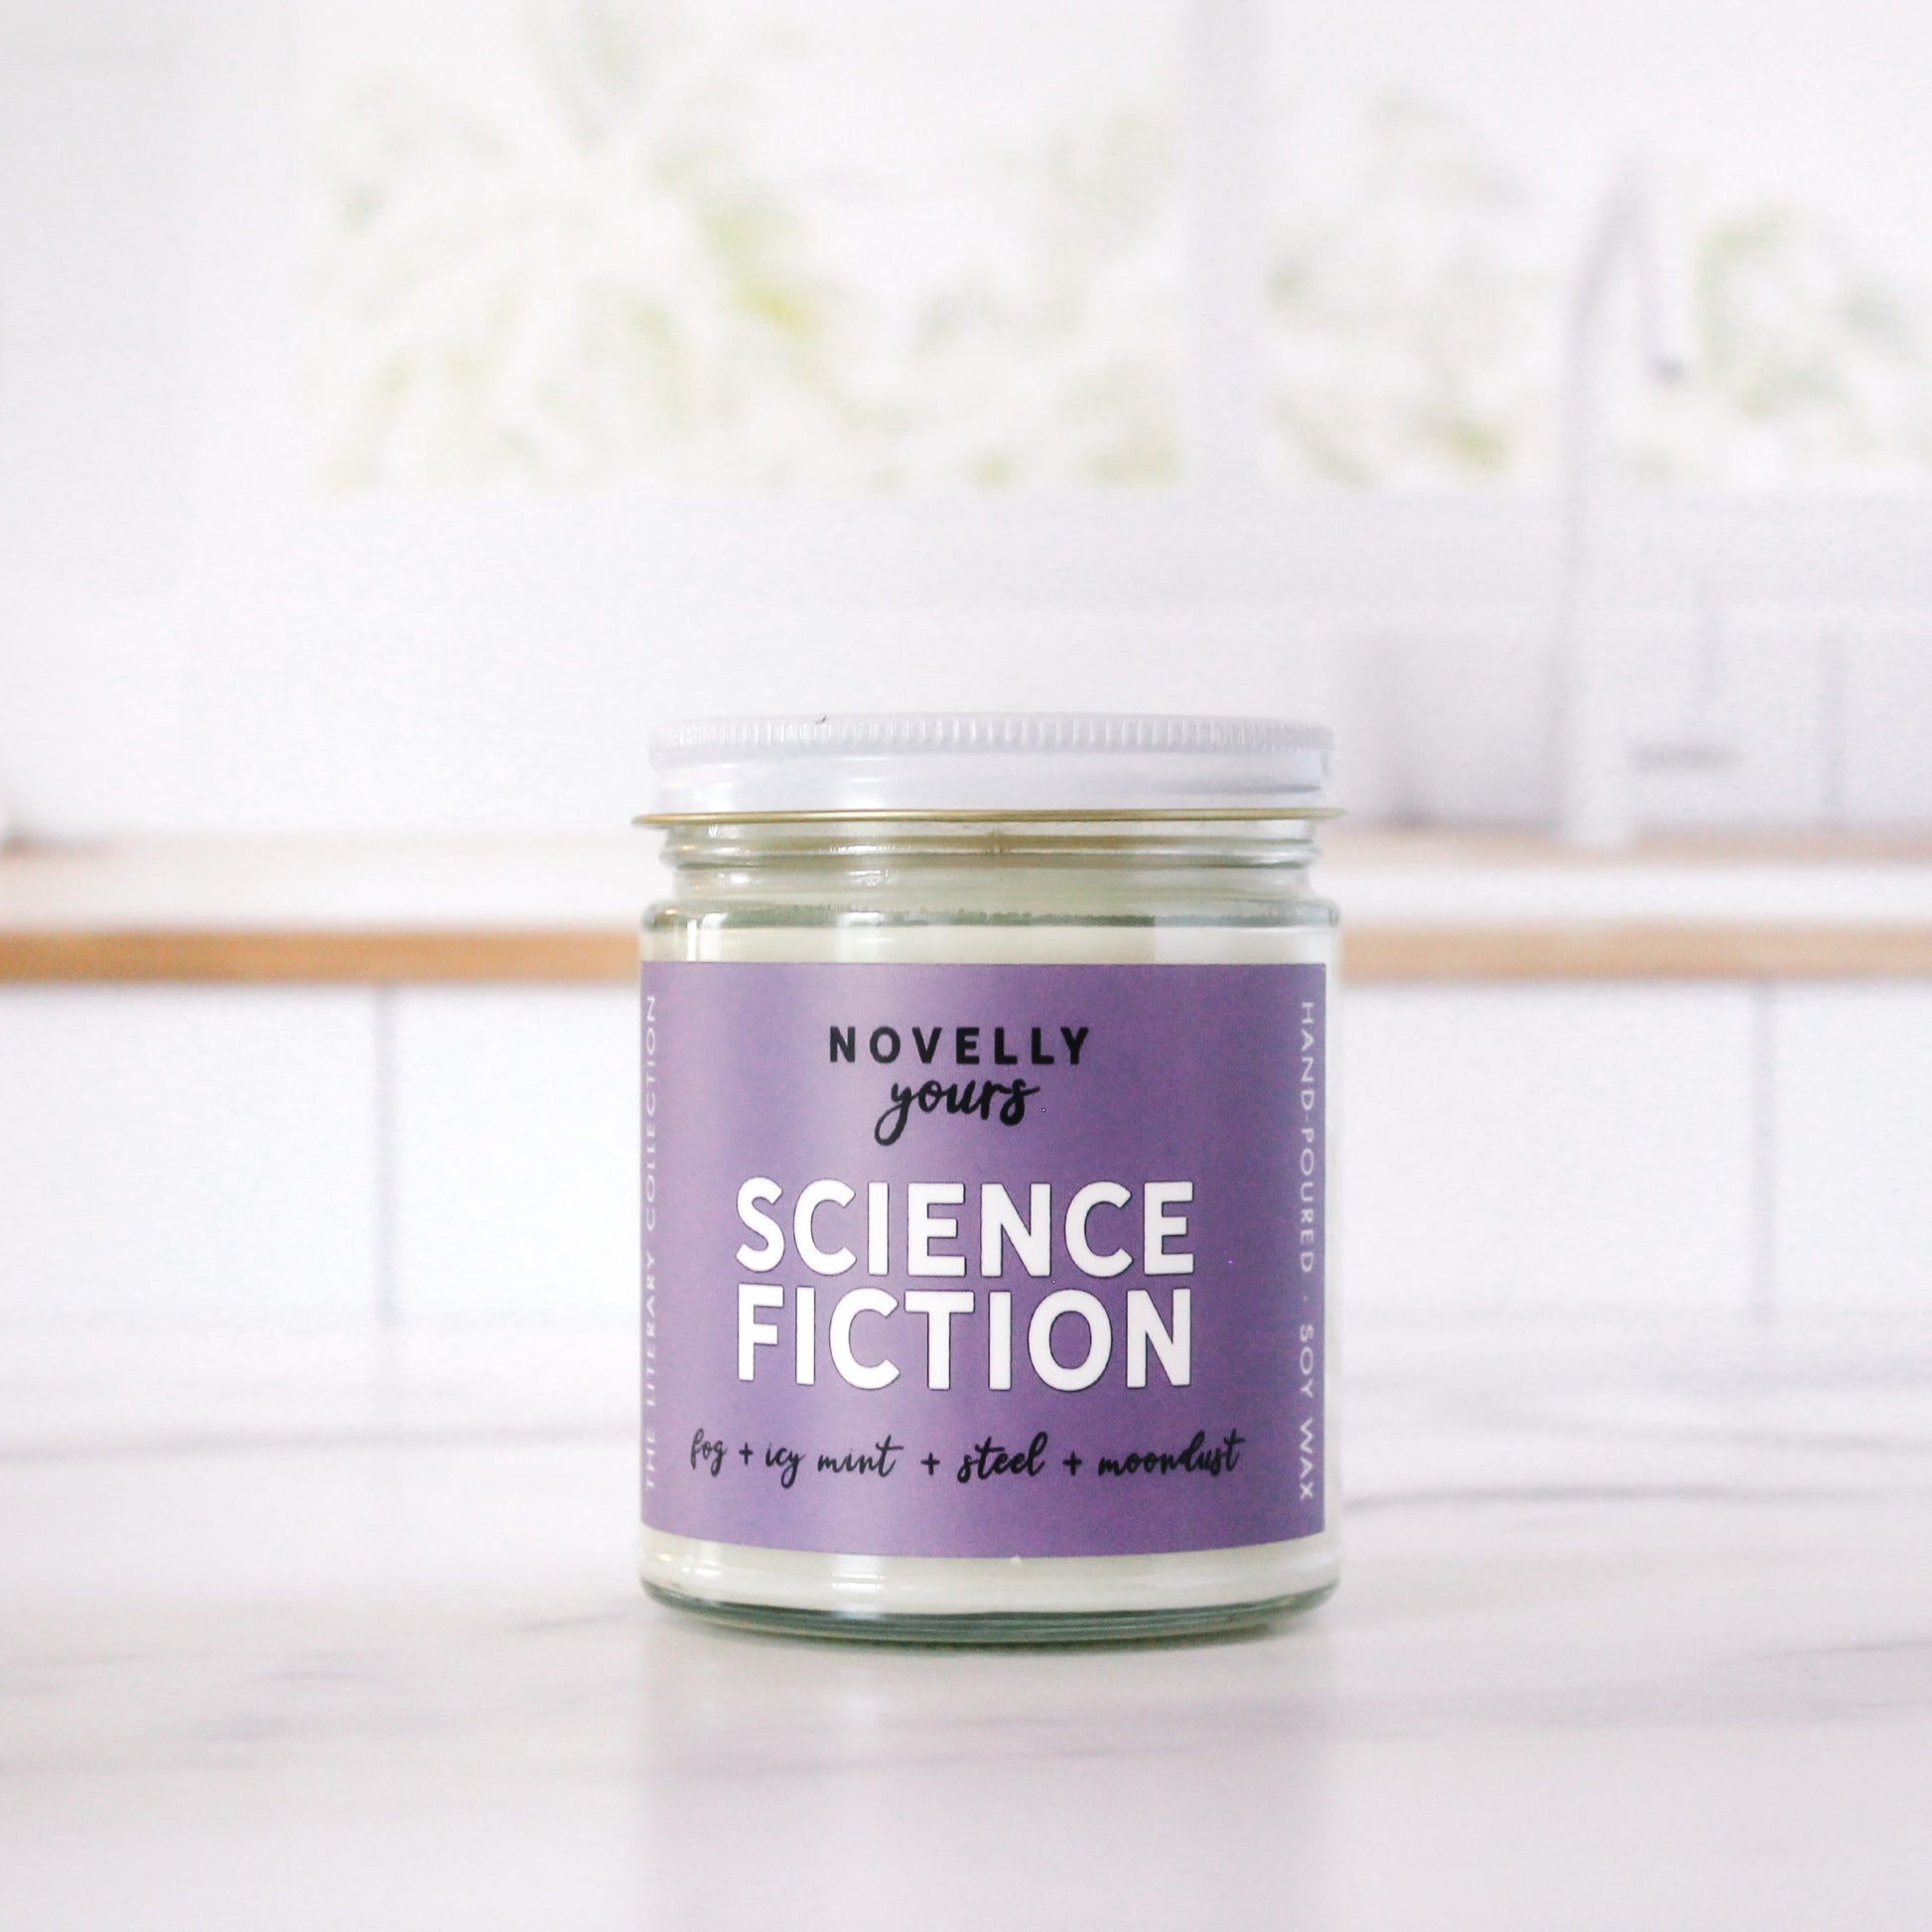 bookish candle labeled "Science Fiction" with purple label sits on a kitchen counter